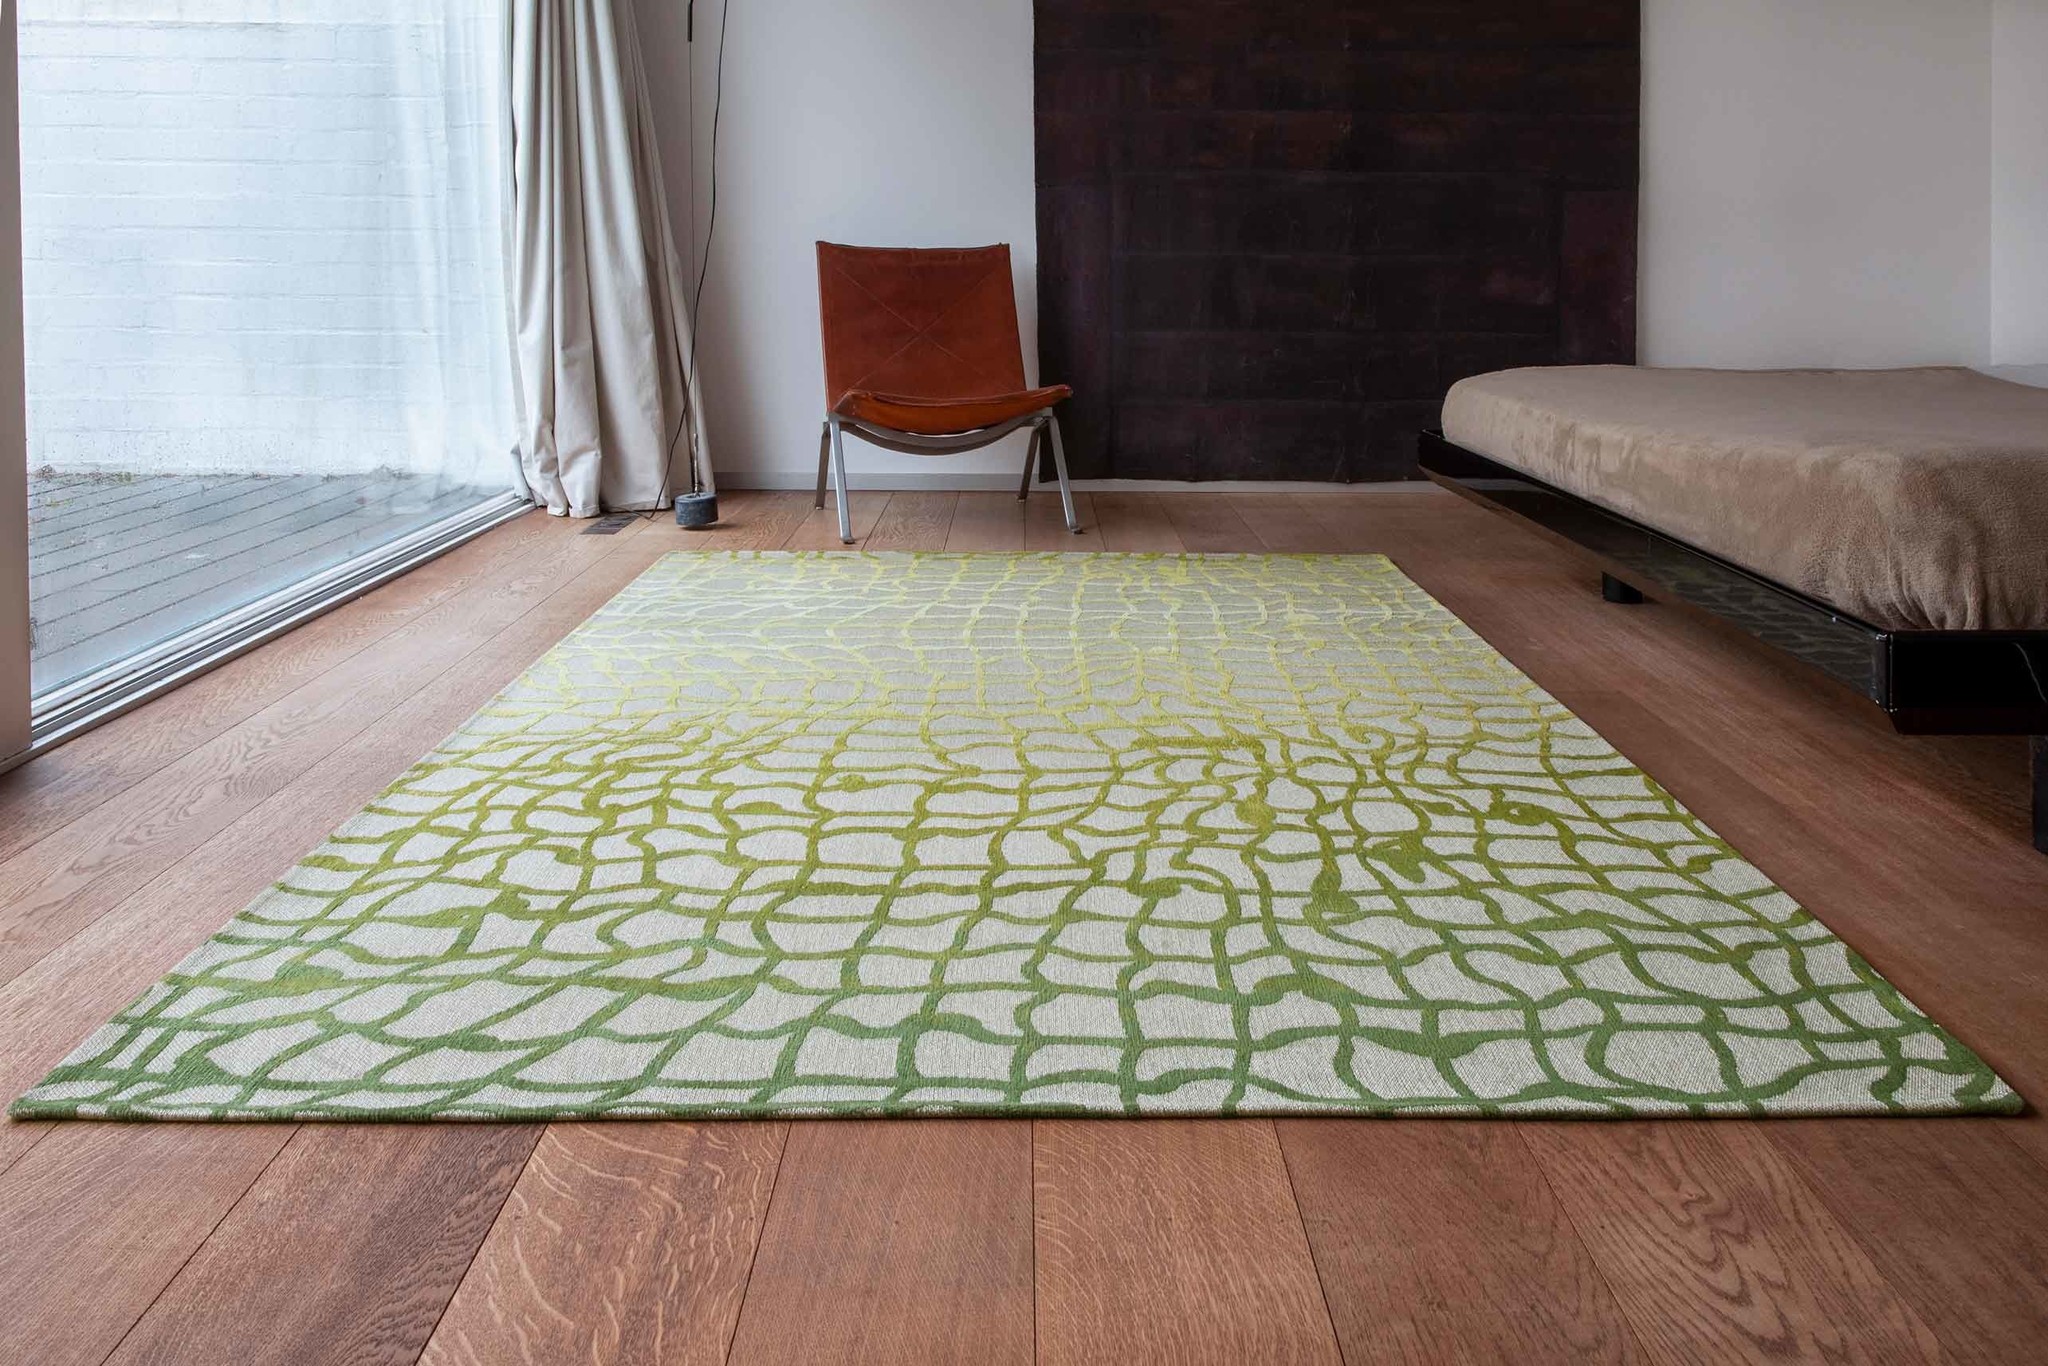 Green Flatwoven Rug ☞ Size: 8' x 11' 2" (240 x 340 cm)